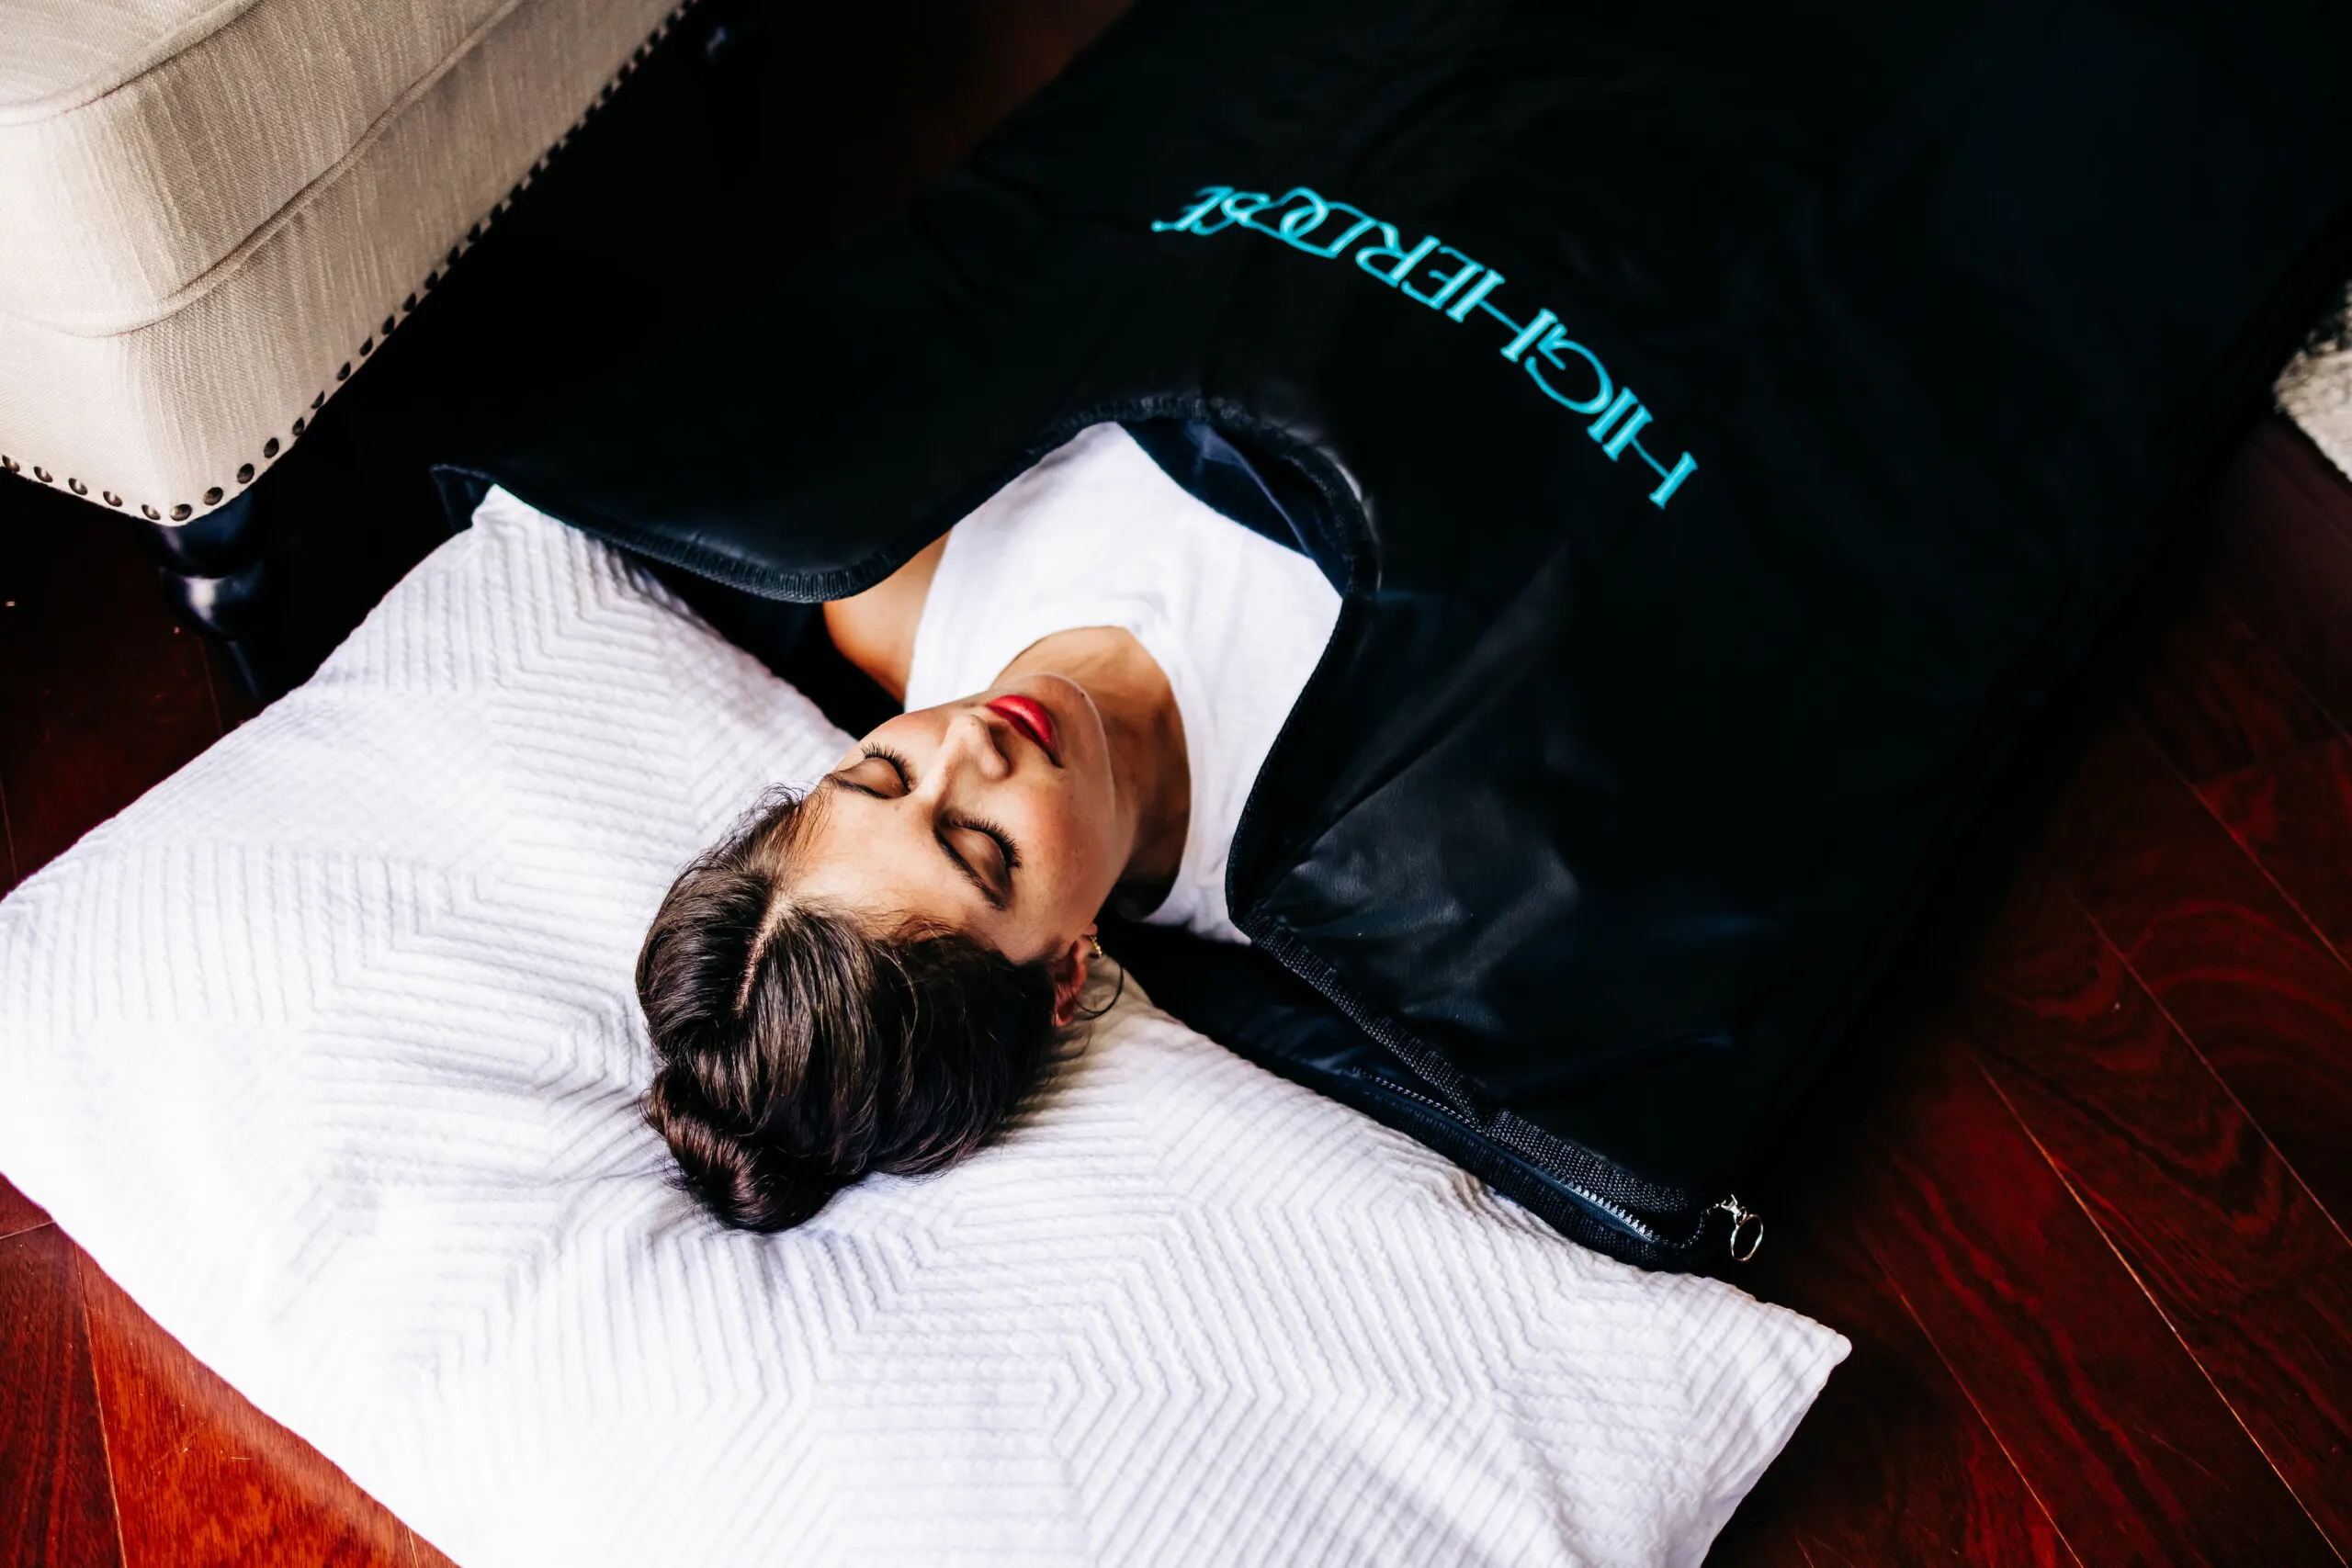 HigherDOSE sauna blanket | Fitness gear that's worth the hype